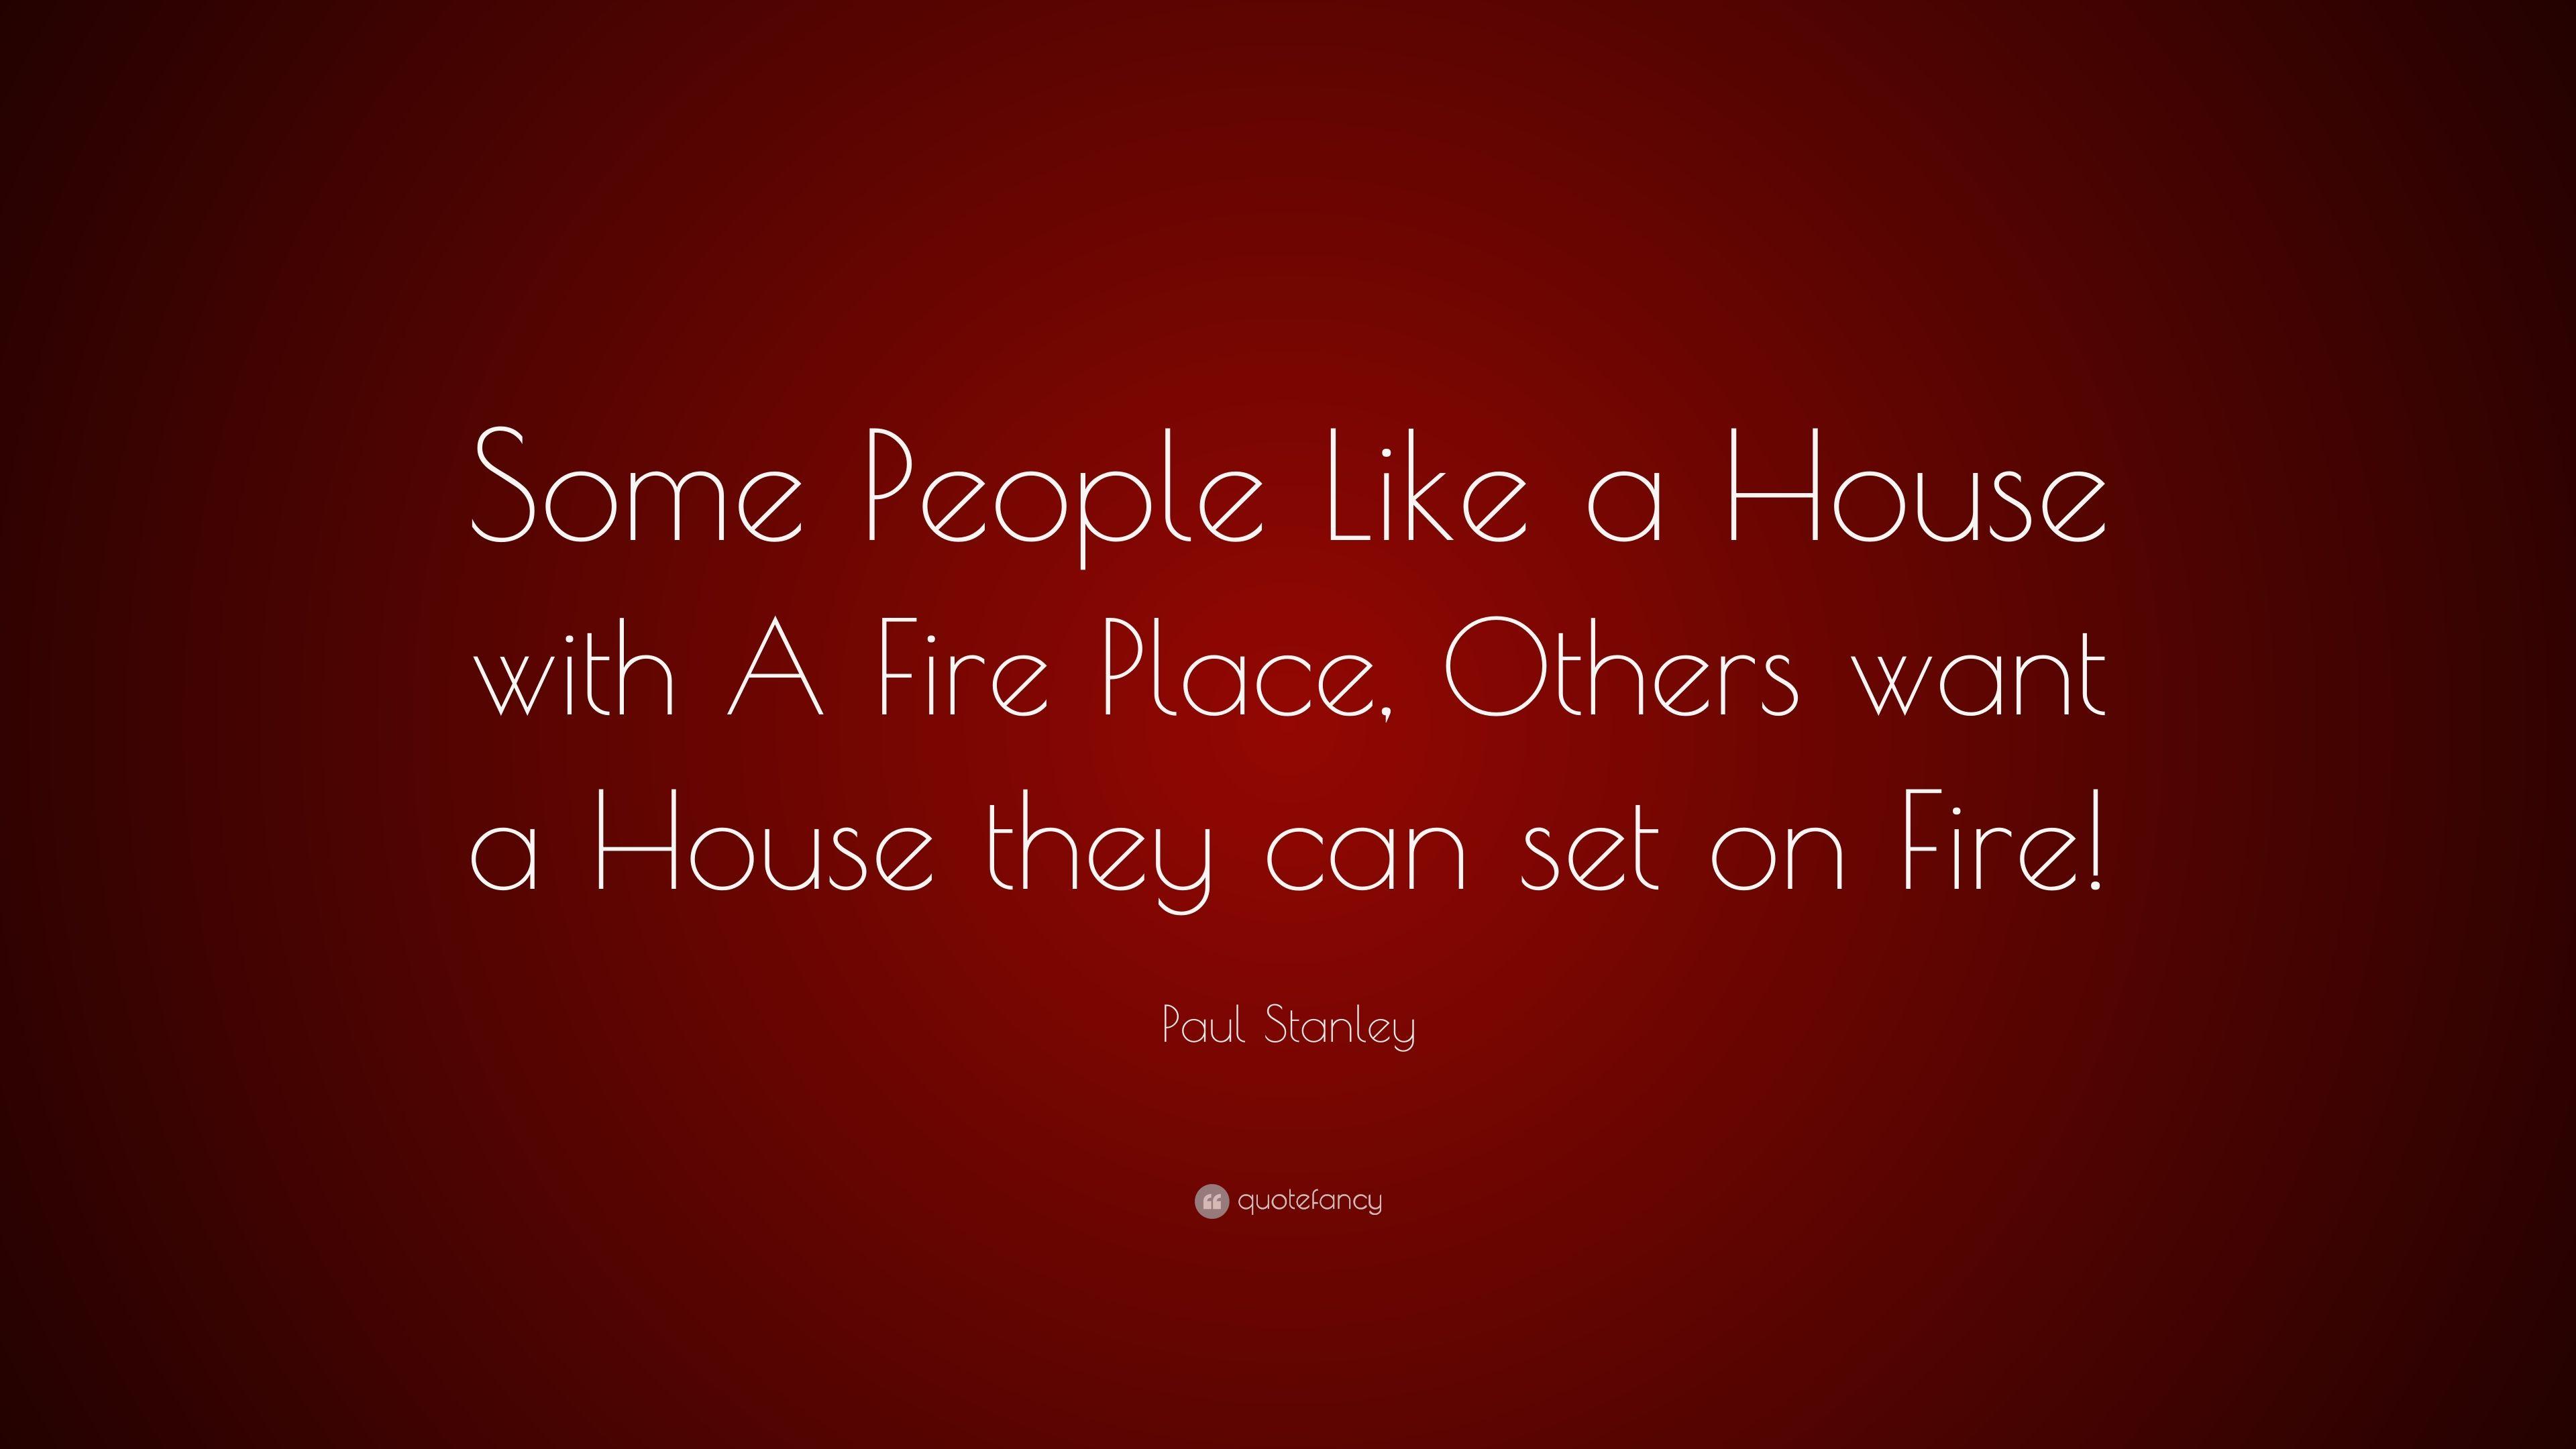 Paul Stanley Quote: “Some People Like a House with A Fire